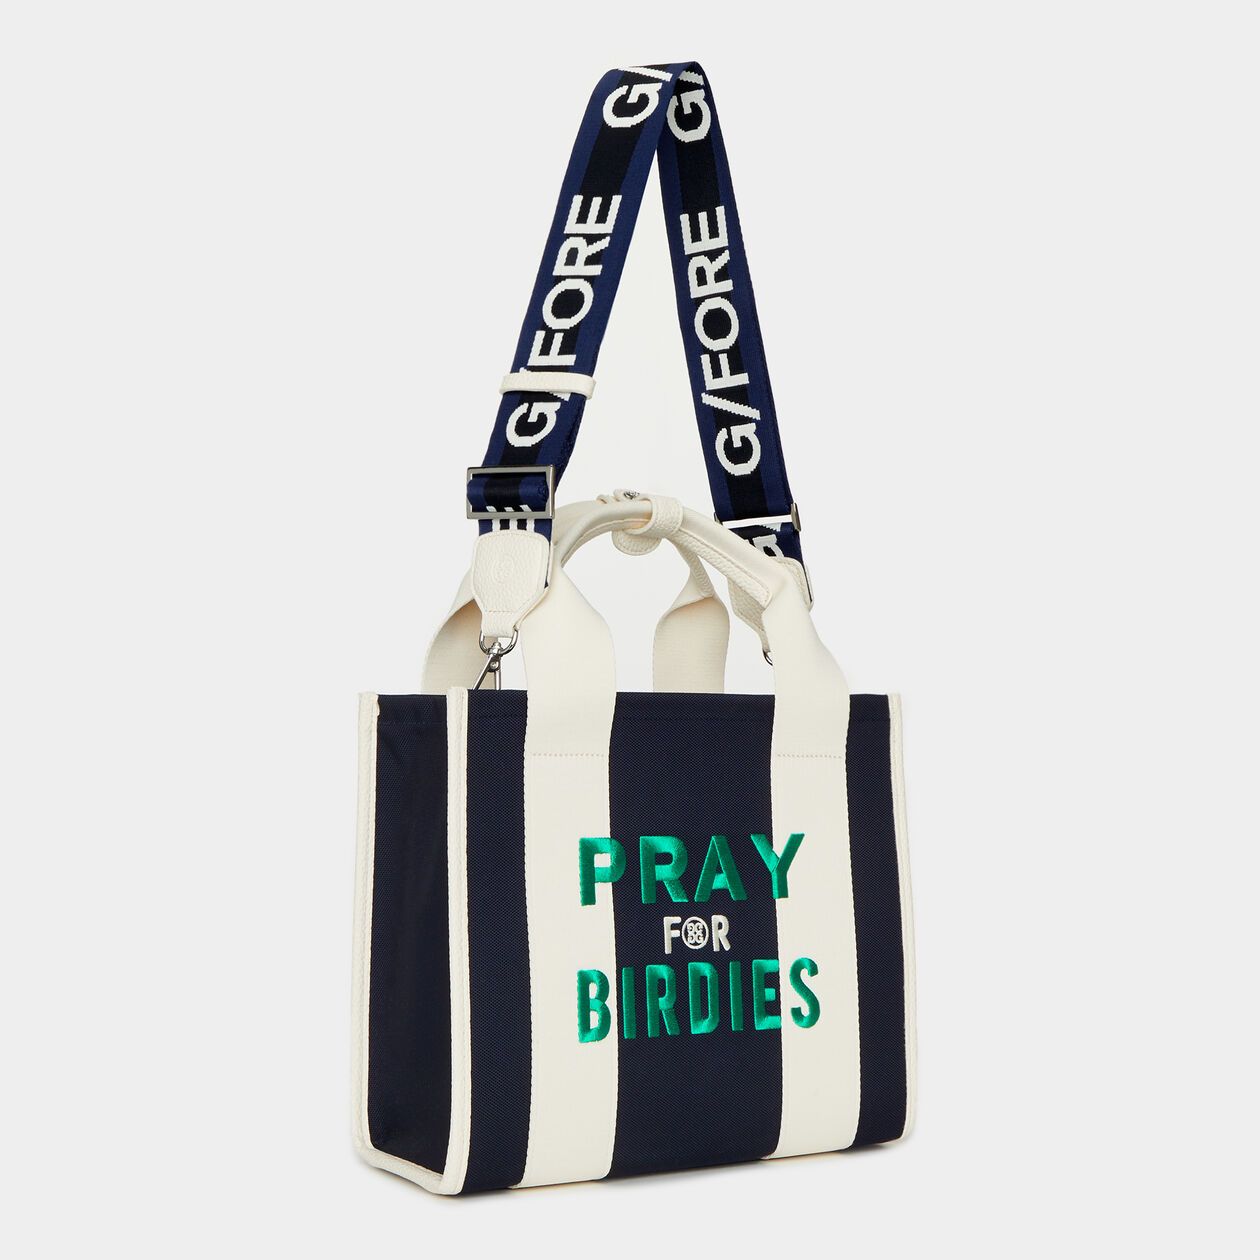 LIMITED EDITION PRAY FOR BIRDIES SQUARE BAG |WOMEN'S BAGS | G/FORE | G/FORE | GFORE.com